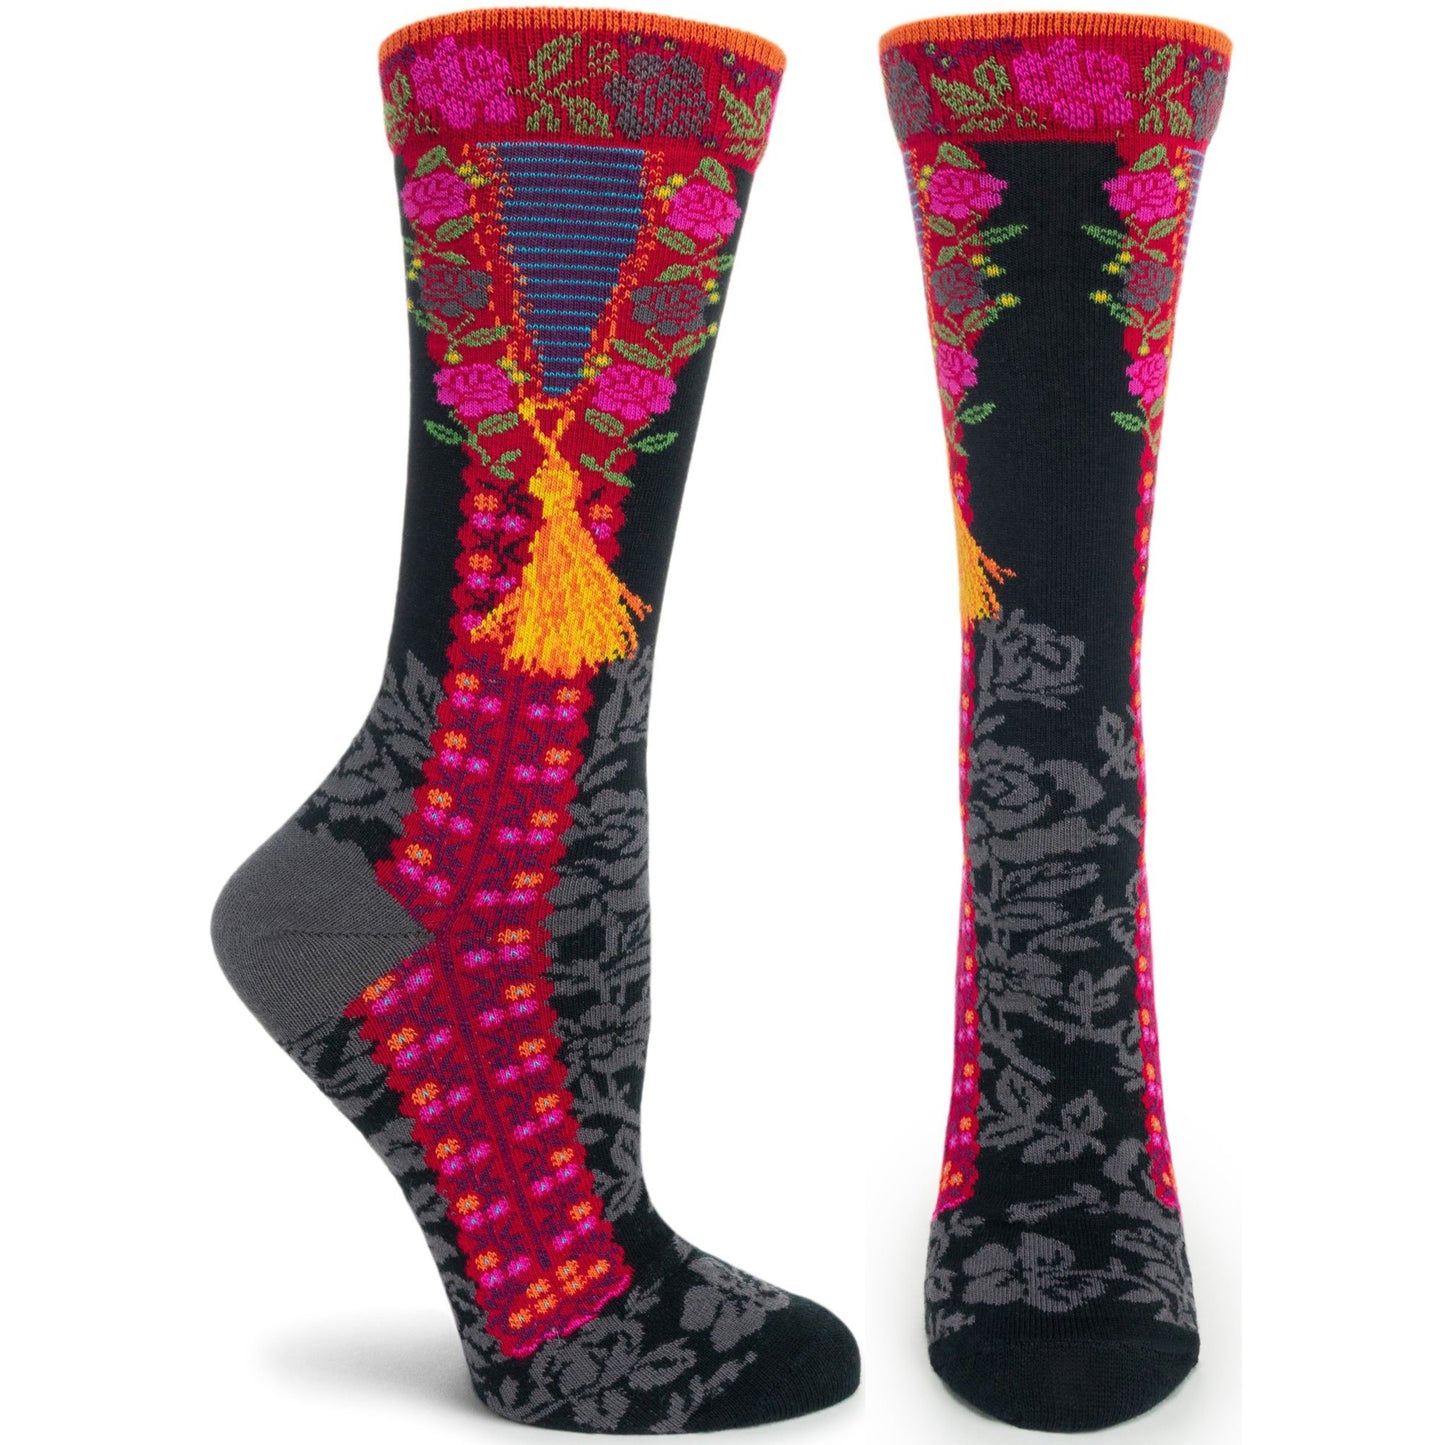 Women's Ozone Gold Tassel and Floral Crew Socks - Gray Pink